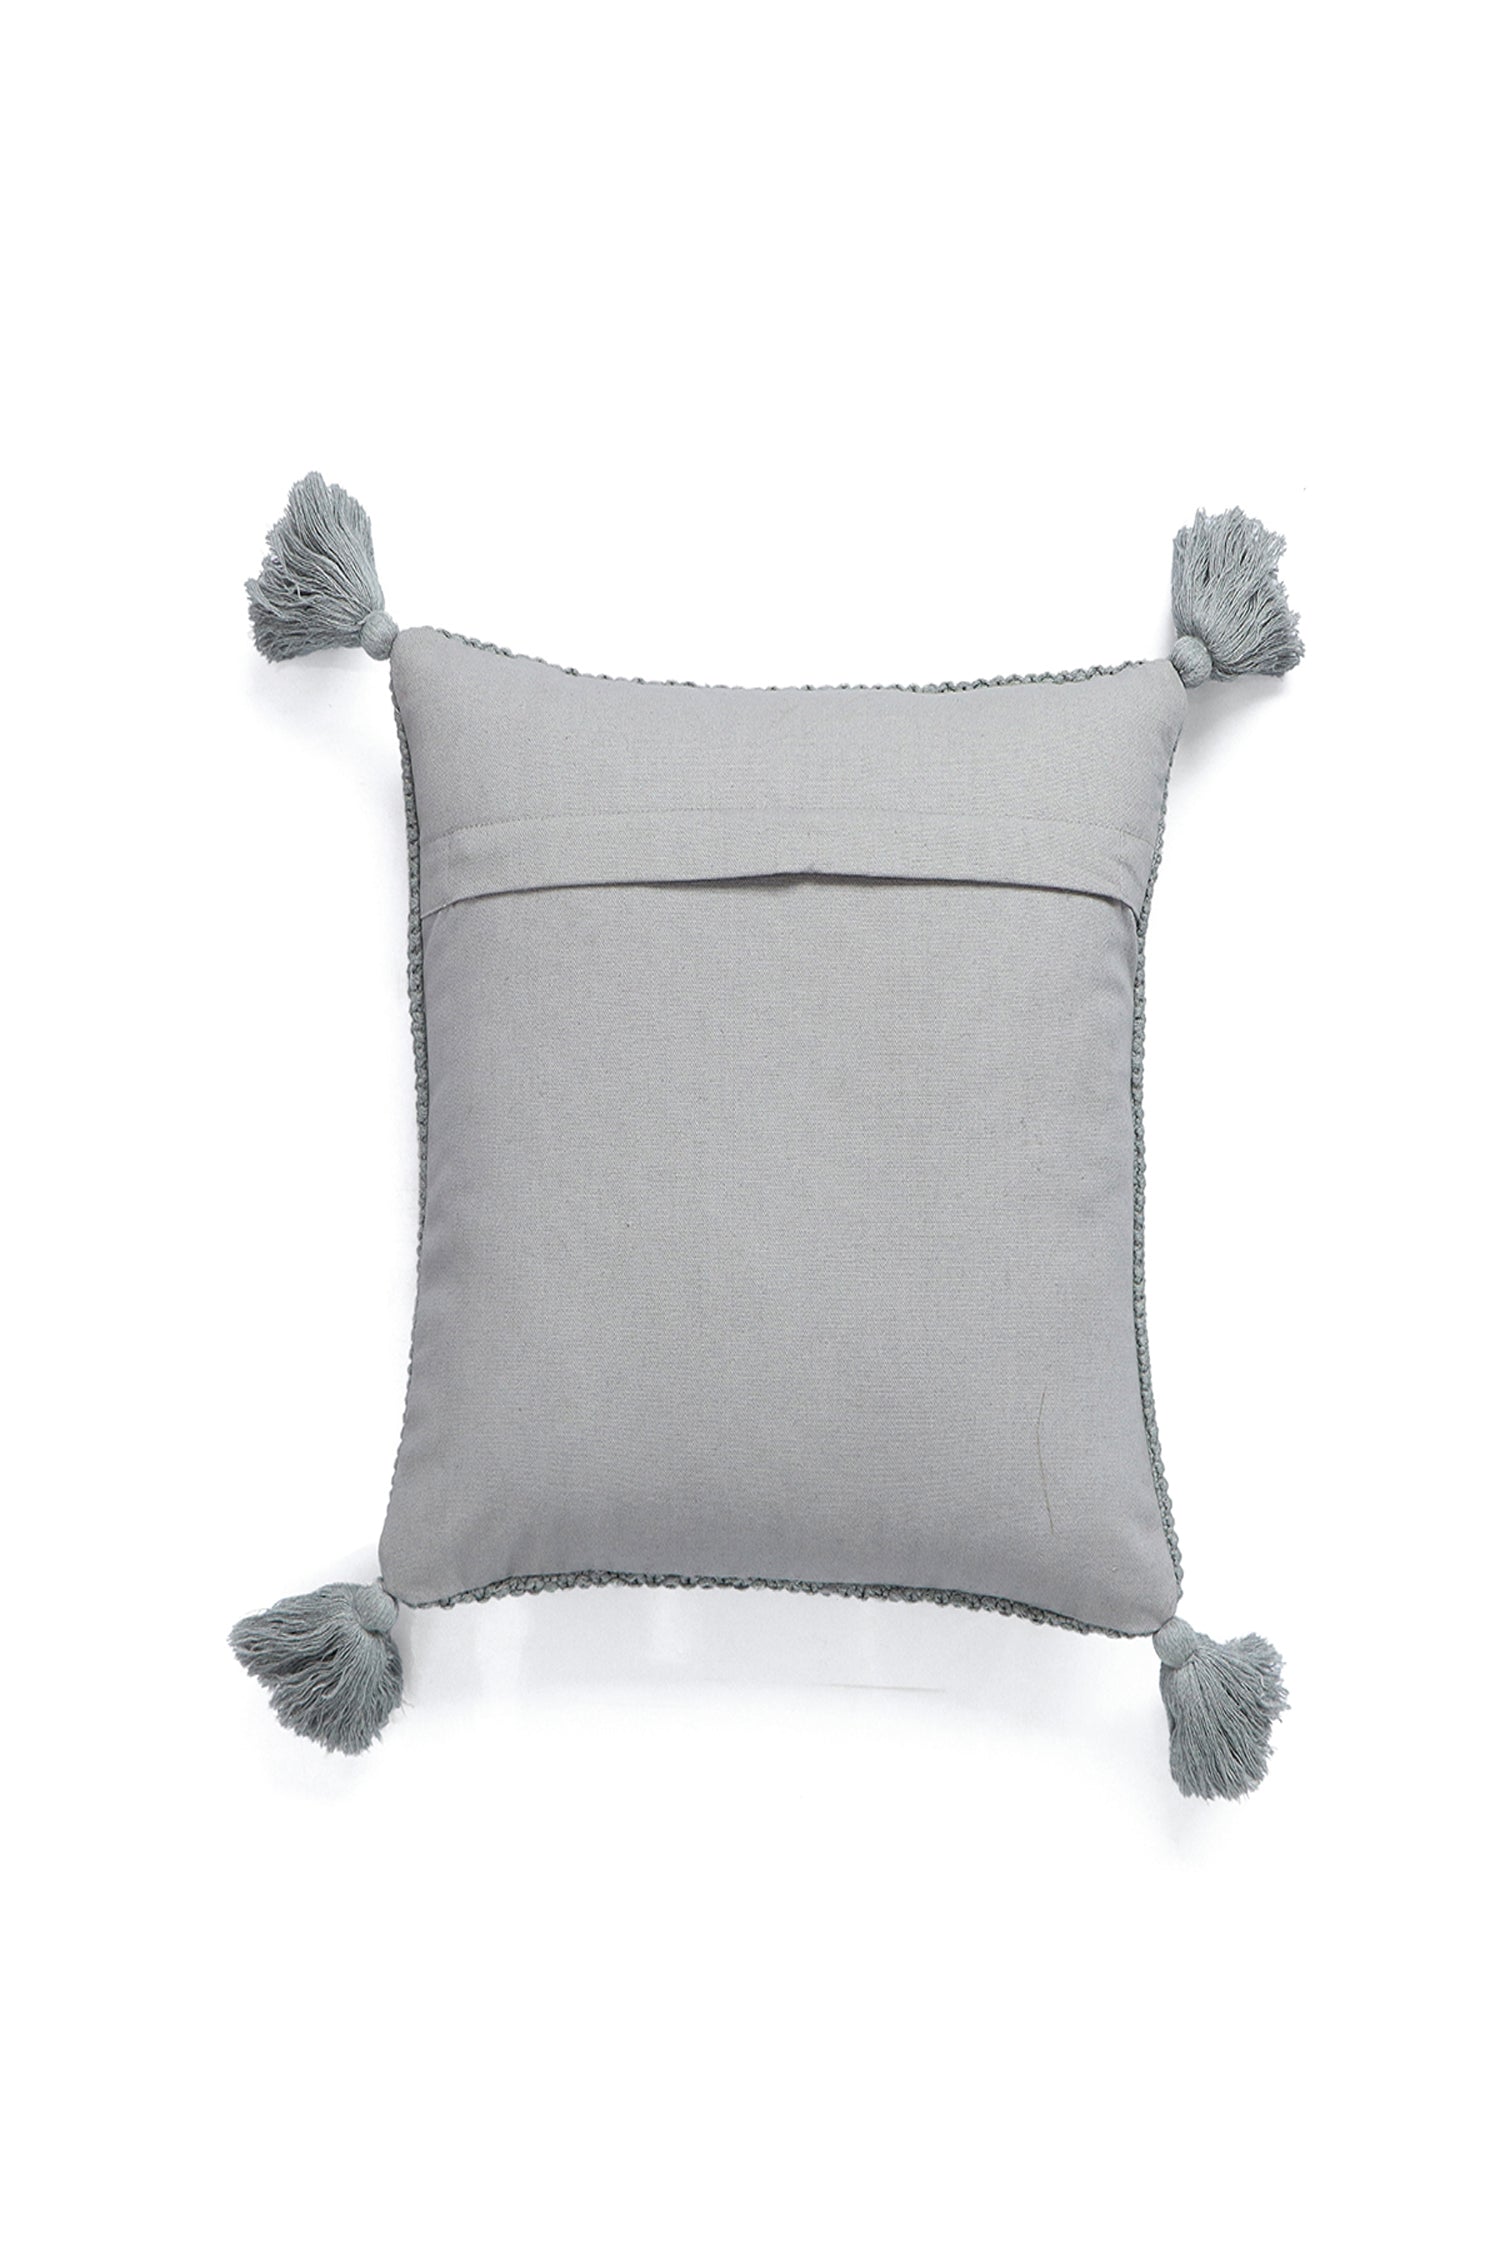 Moss Knitted Decorative Cushion cover (Light Grey Melange)